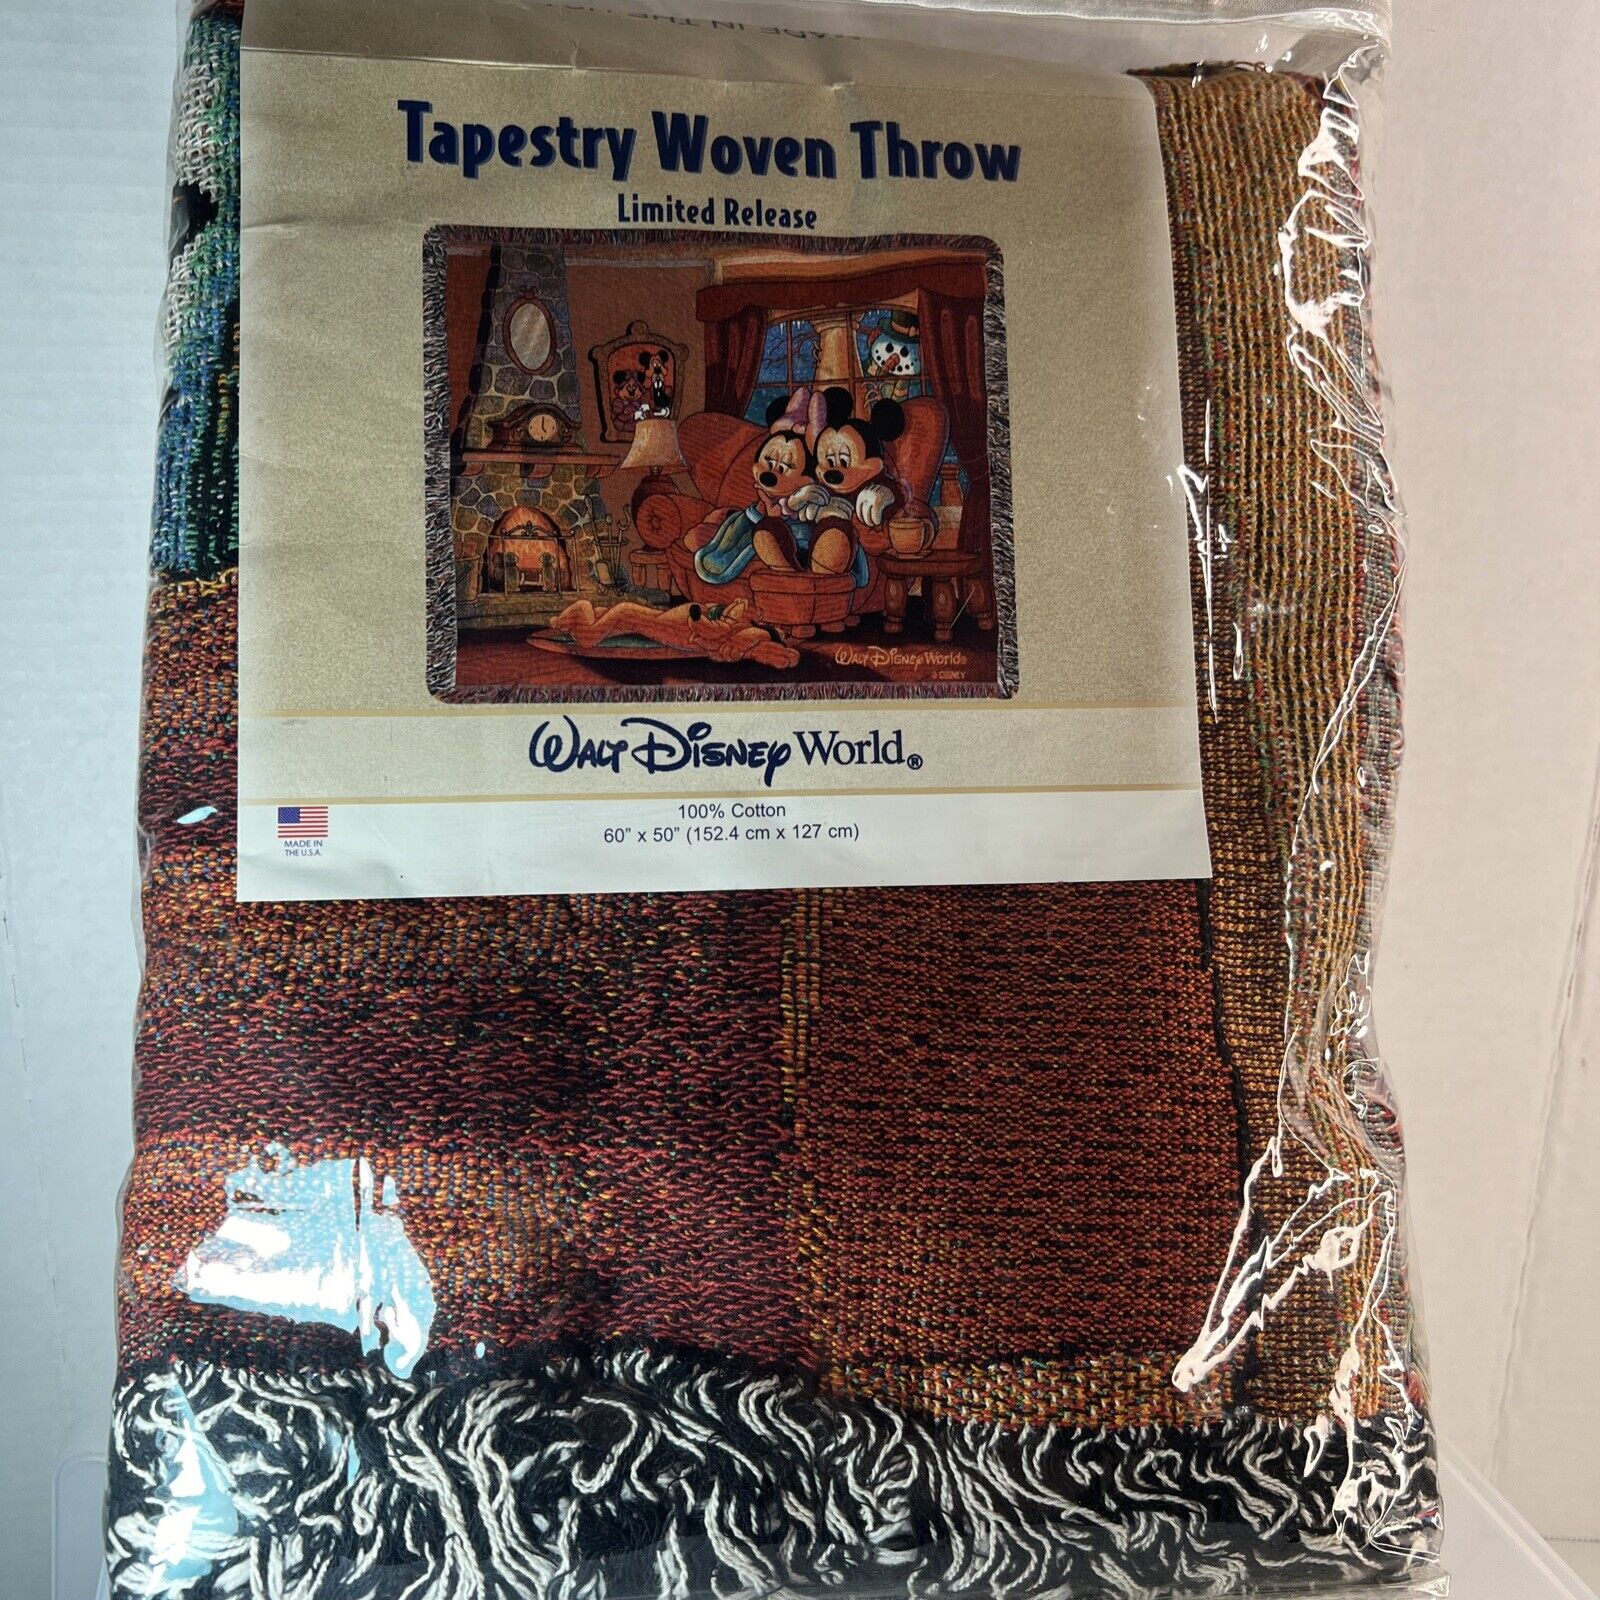 Disney Cozy Mickey Fireplace Tapestry.  Woven Throw Limited Release 60” X 50”